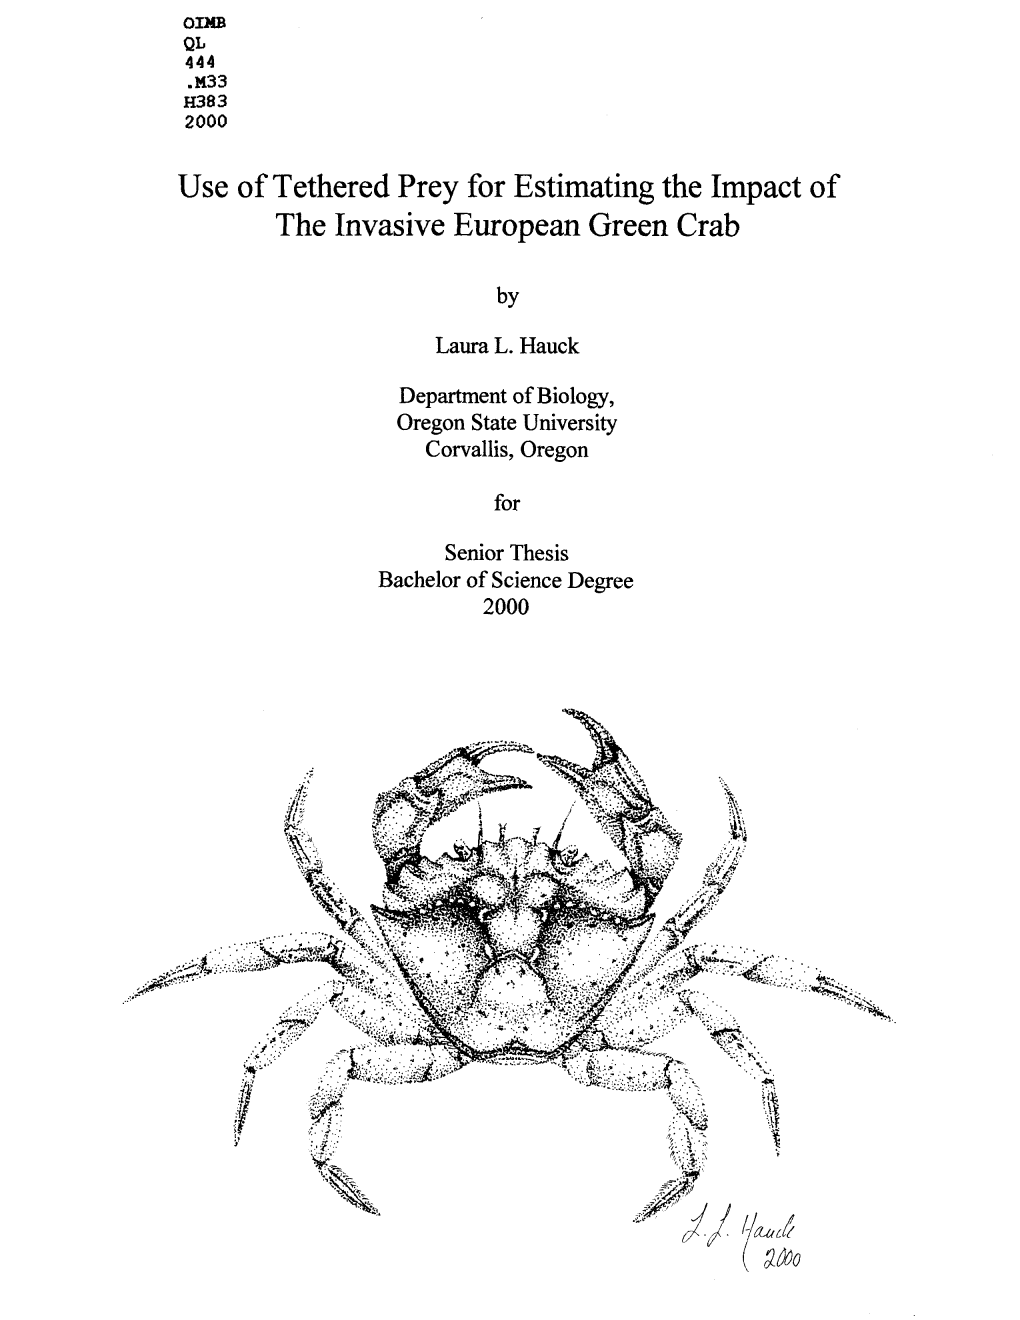 Use of Tethered Prey for Estimating the Impact of the Invasive European Green Crab